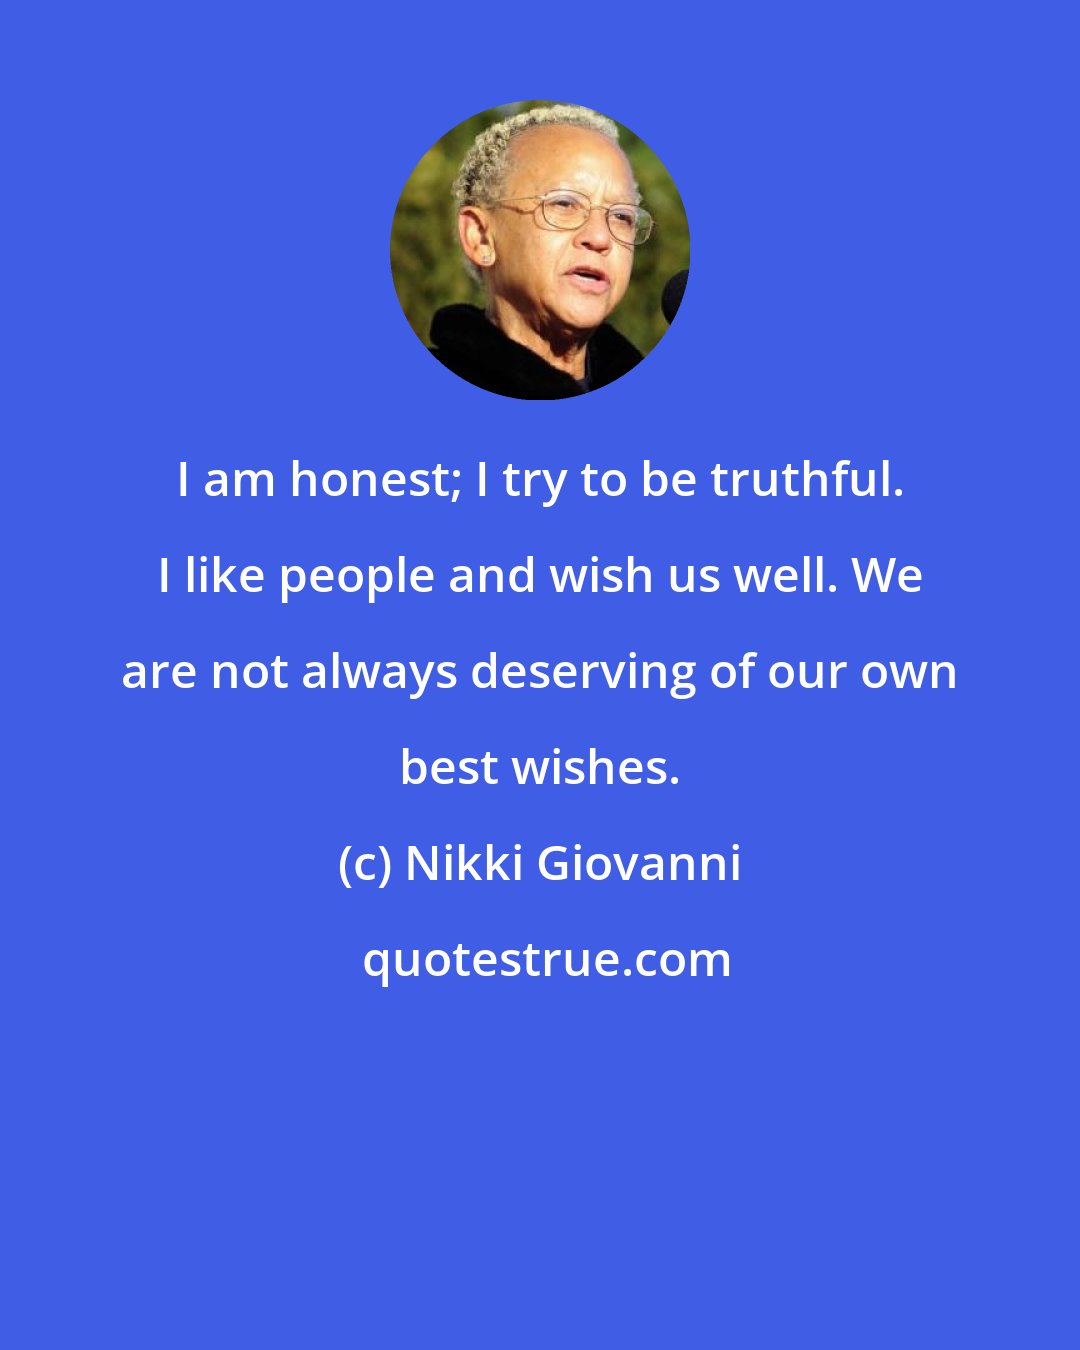 Nikki Giovanni: I am honest; I try to be truthful. I like people and wish us well. We are not always deserving of our own best wishes.